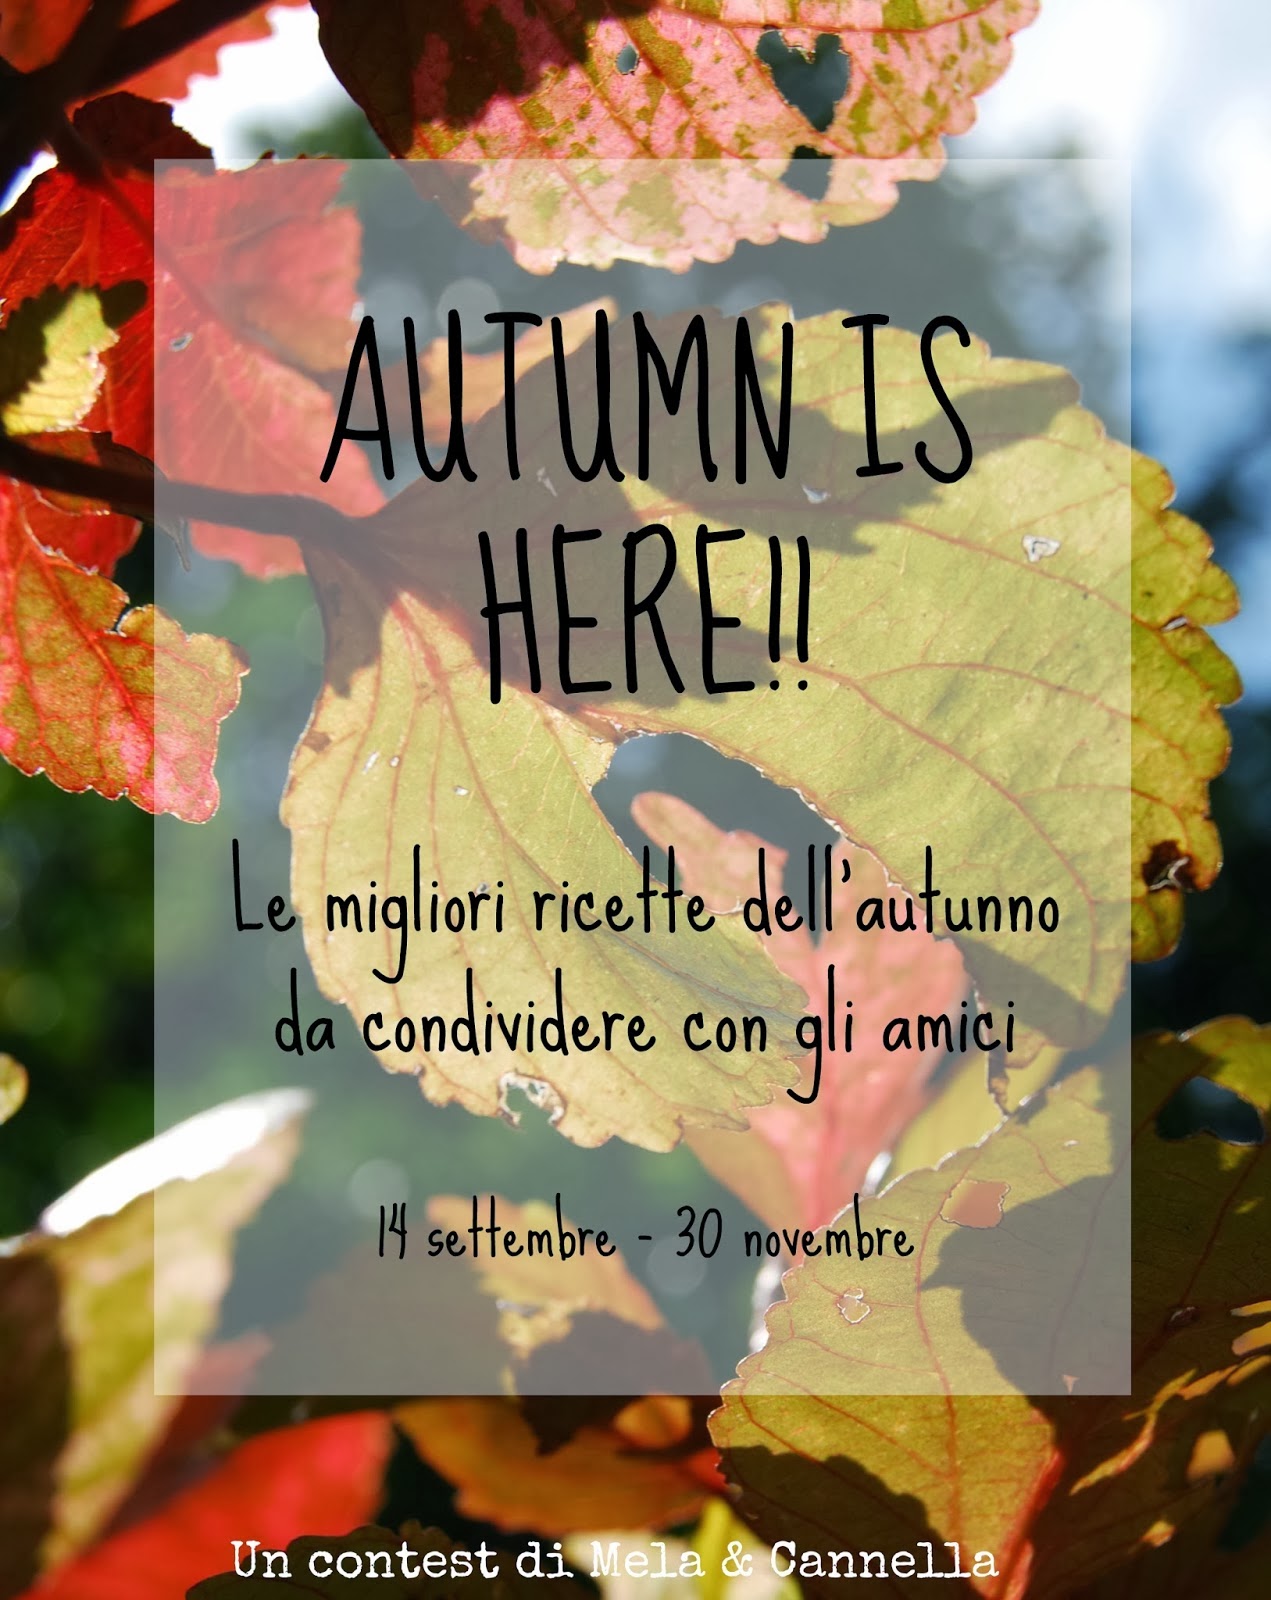 Contest "Autumn is here"